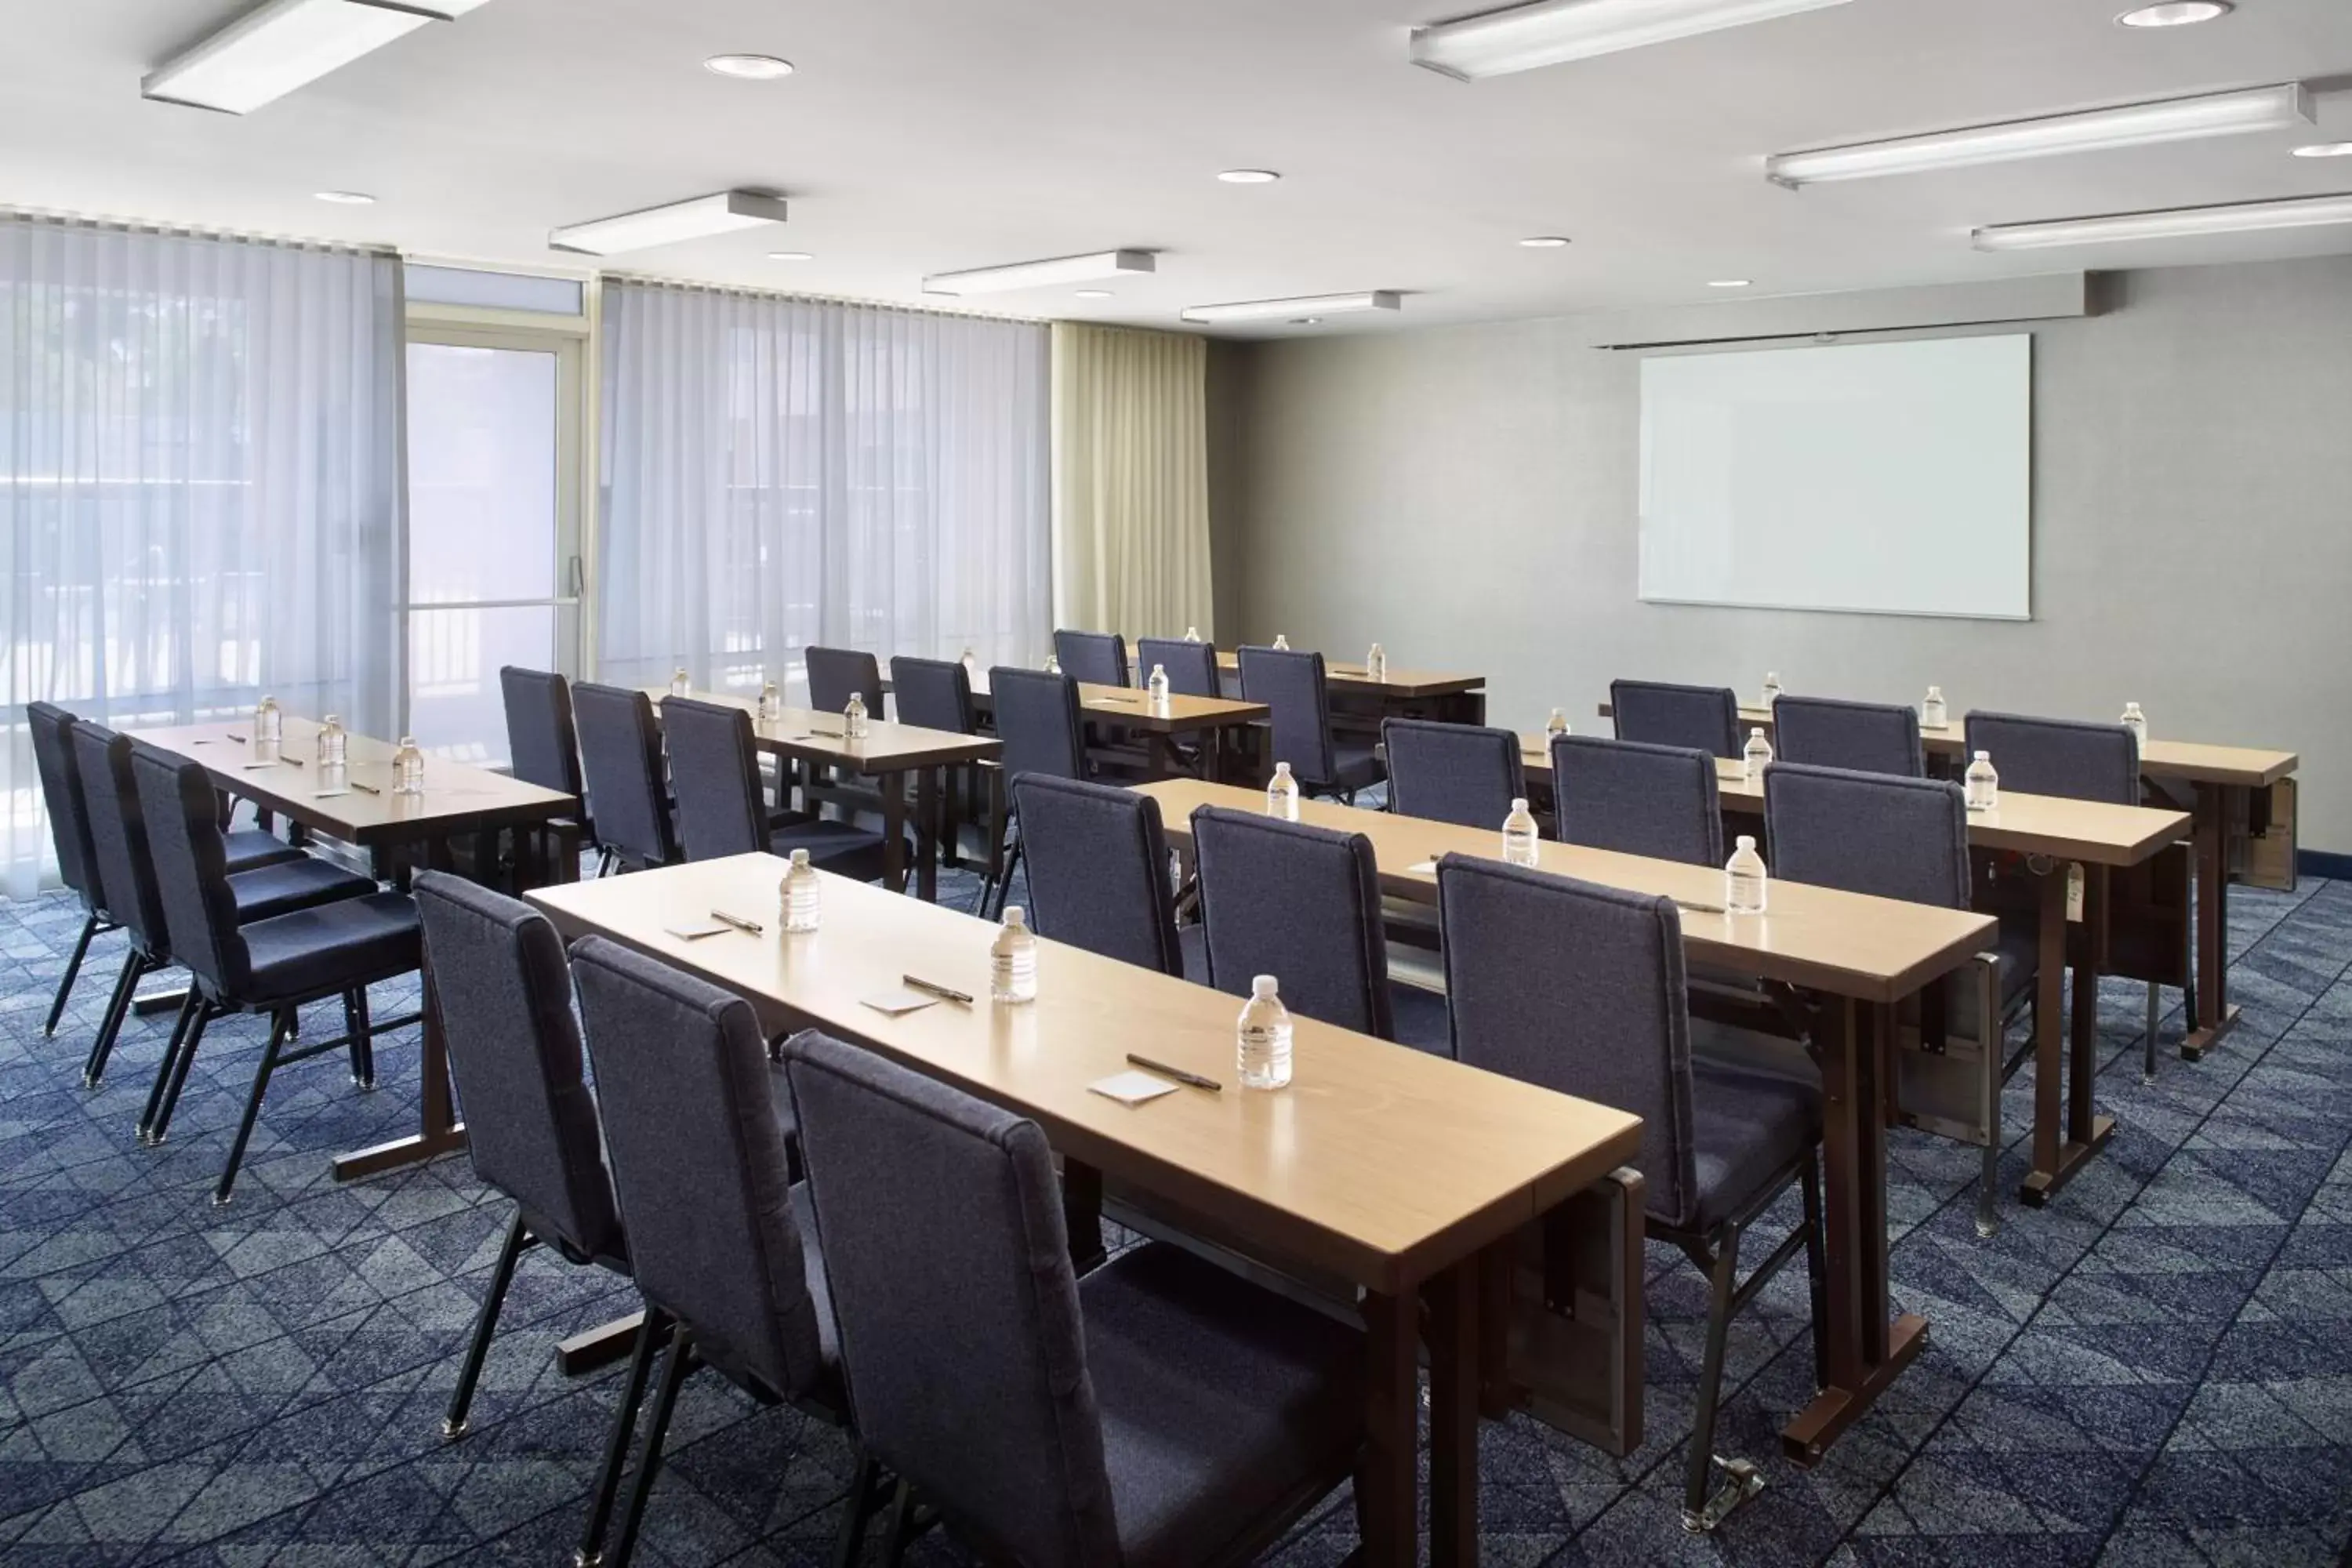 Meeting/conference room in Courtyard by Marriott Myrtle Beach Broadway